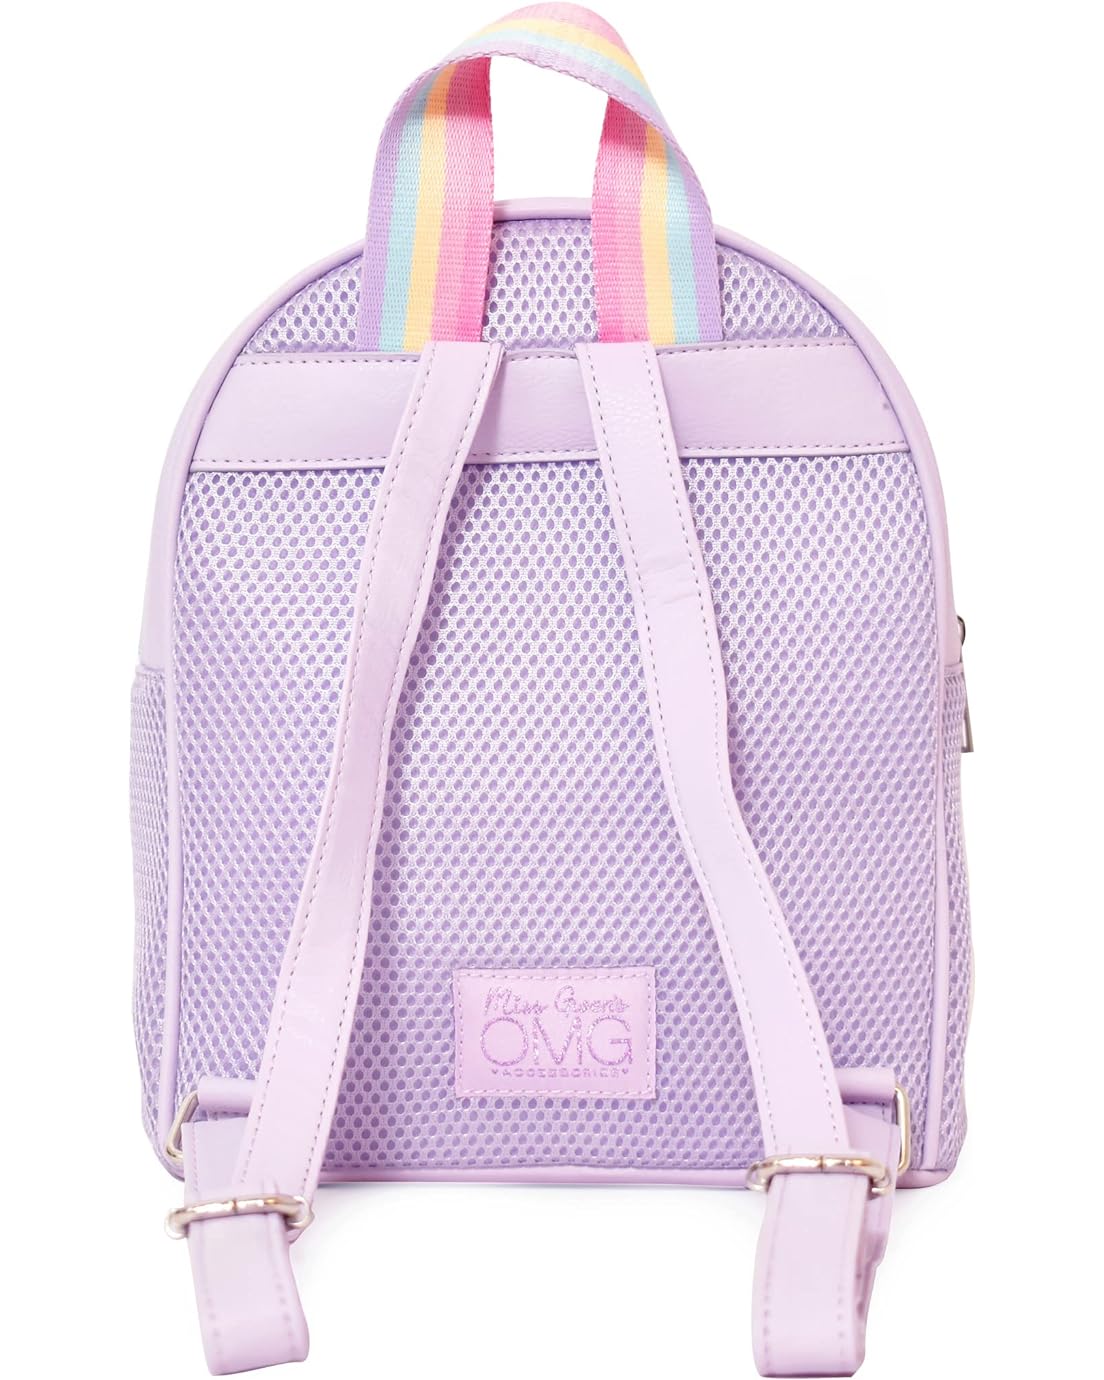  Miss Gwen’s OMG Accessories Diagonal Ombre Glitter Butterfly Crown Mini Backpack